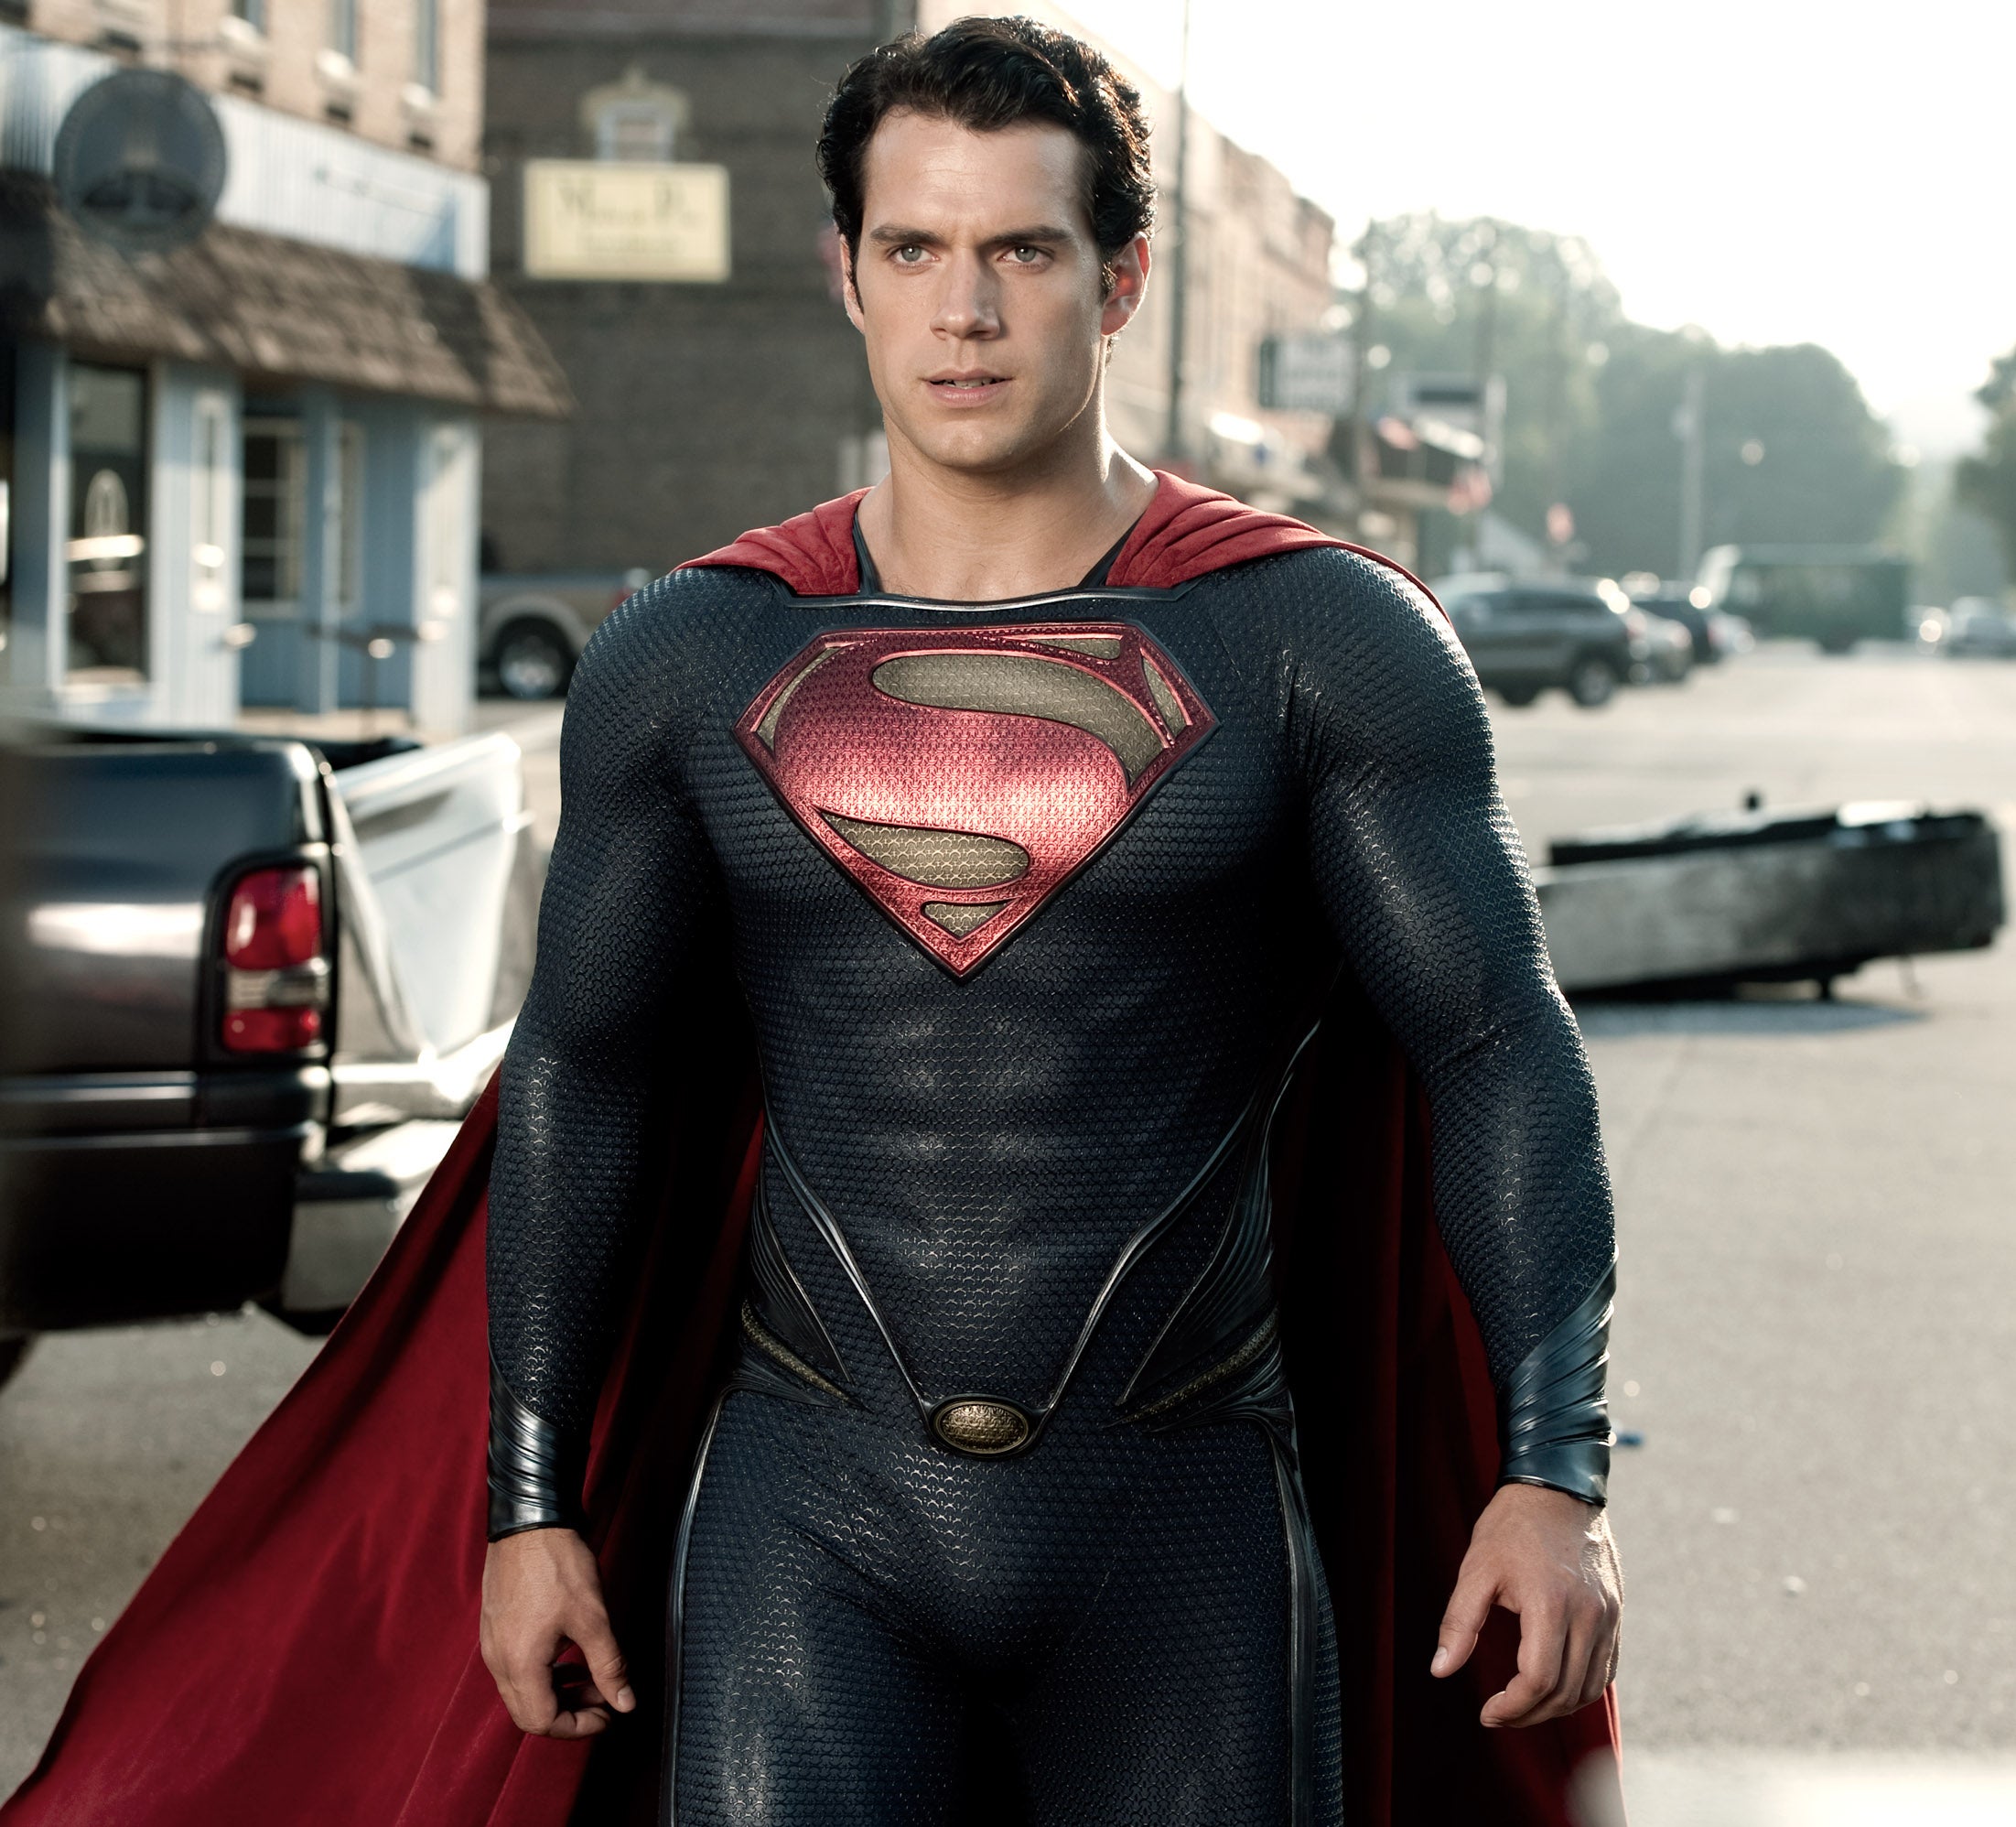 Batman vs Superman costumes: Crotch must be 'appealing but  non-confrontational', says designer, The Independent